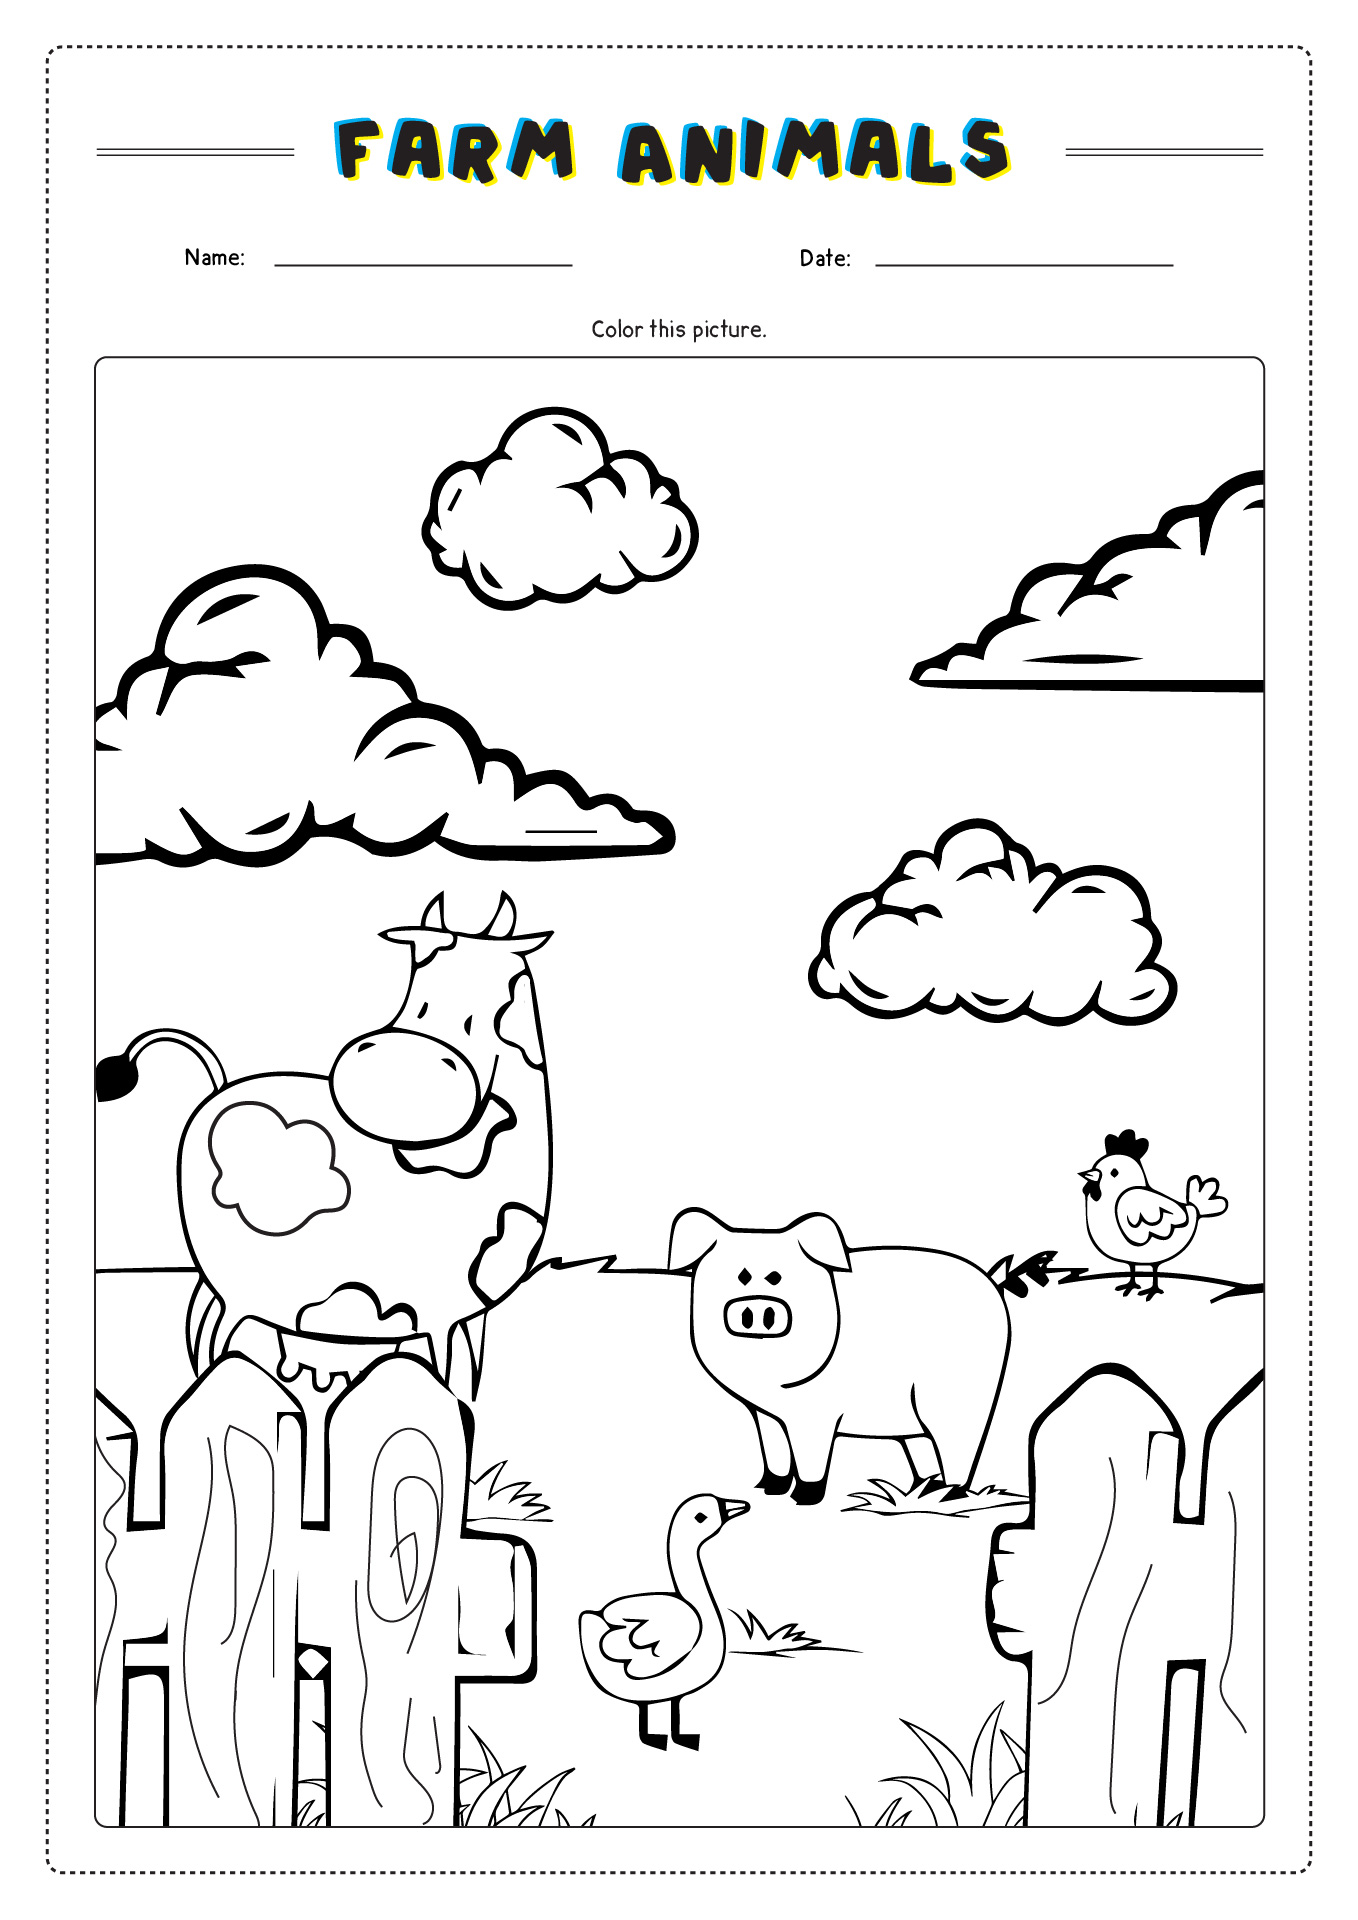 10-best-images-of-farm-animals-worksheets-for-kids-printable-farm